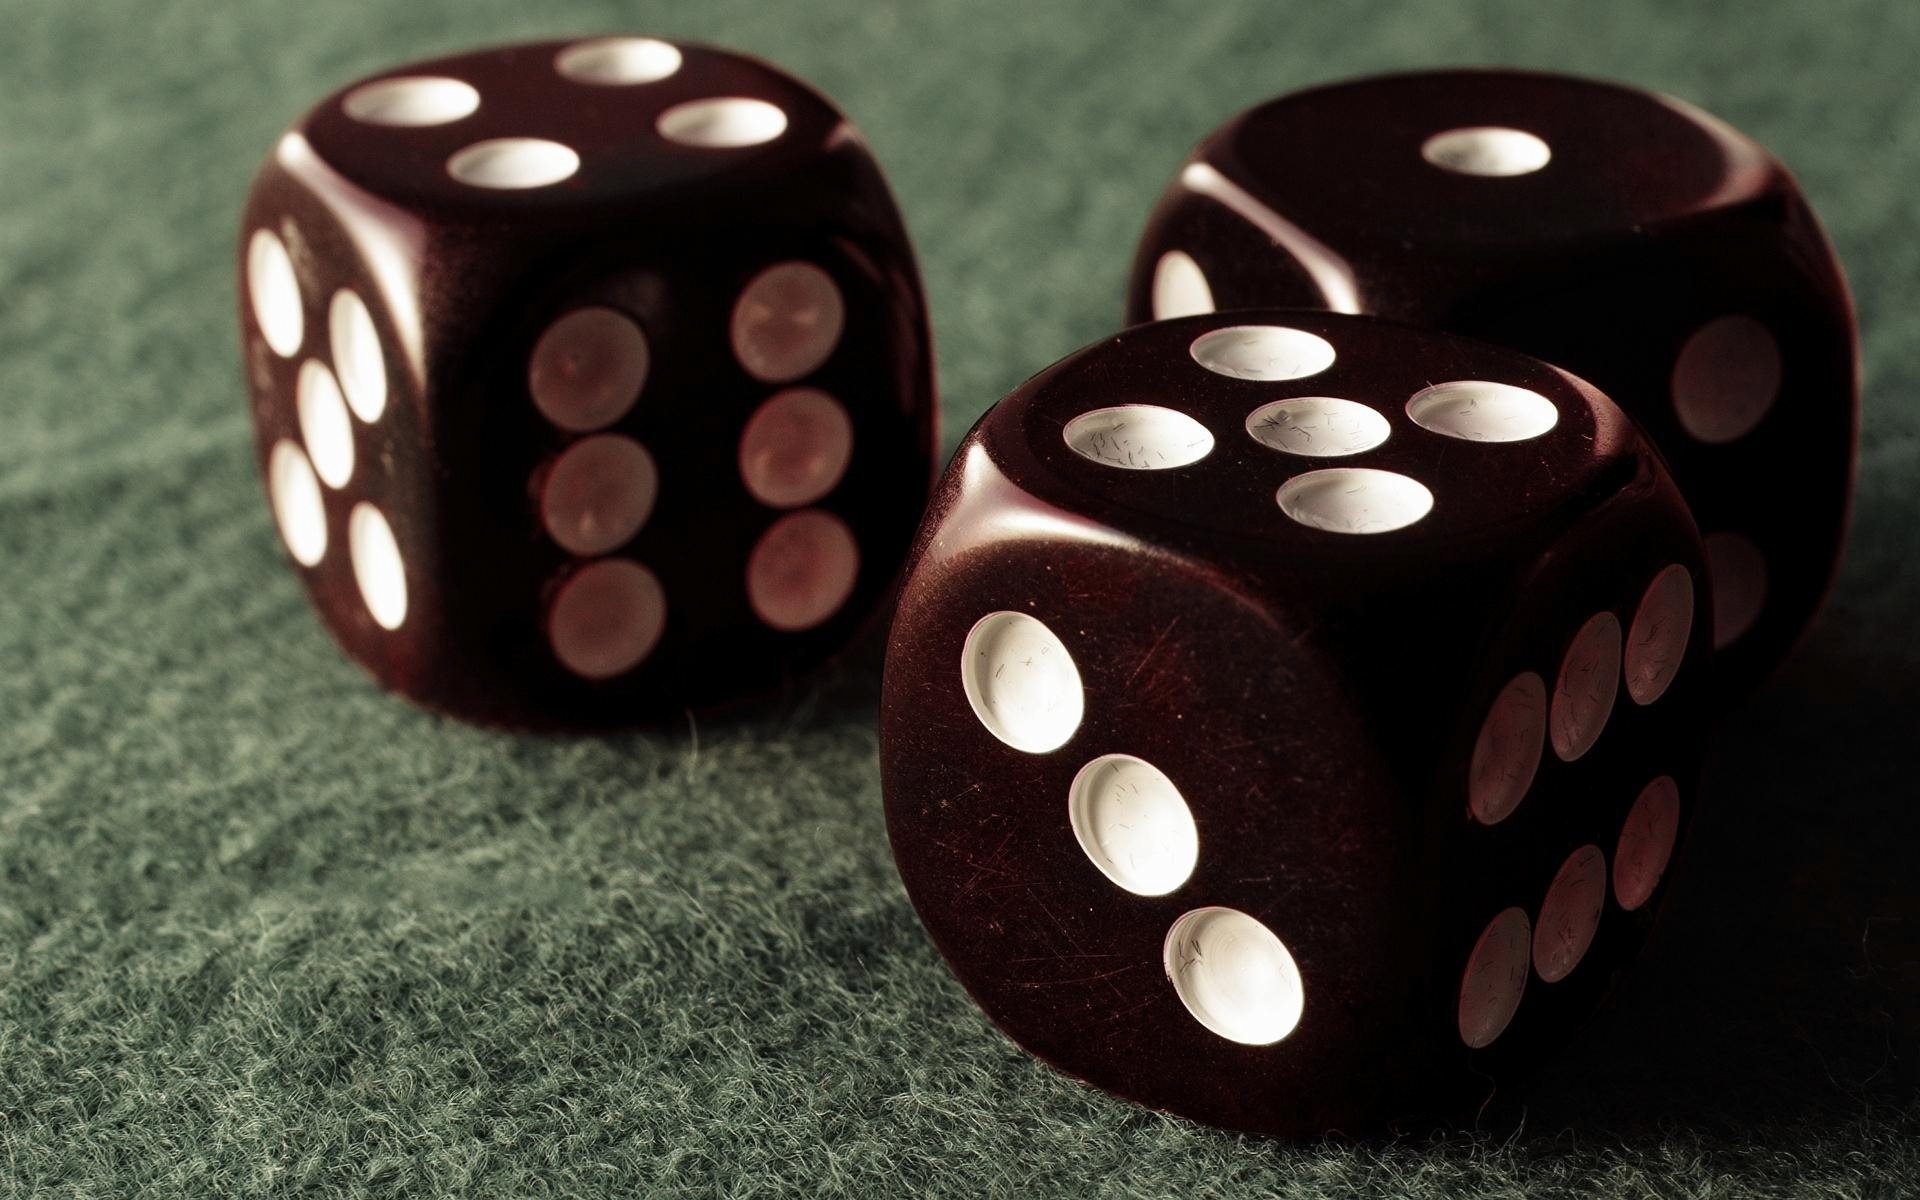 Dice old mobile, cell phone, smartphone wallpapers hd, desktop backgrounds  240x320, images and pictures